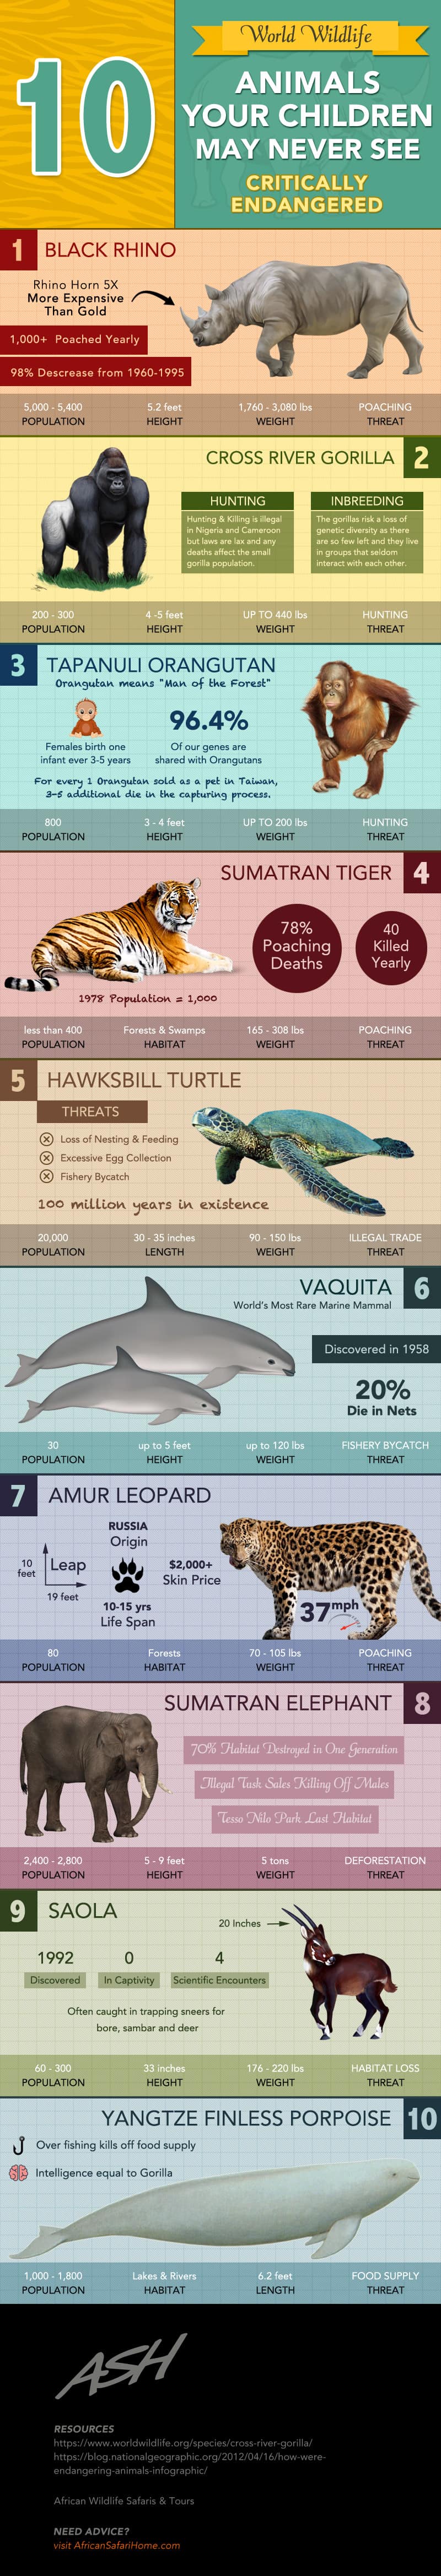 10 Endangered Animals To See Before They're Gone | Daily Infographic